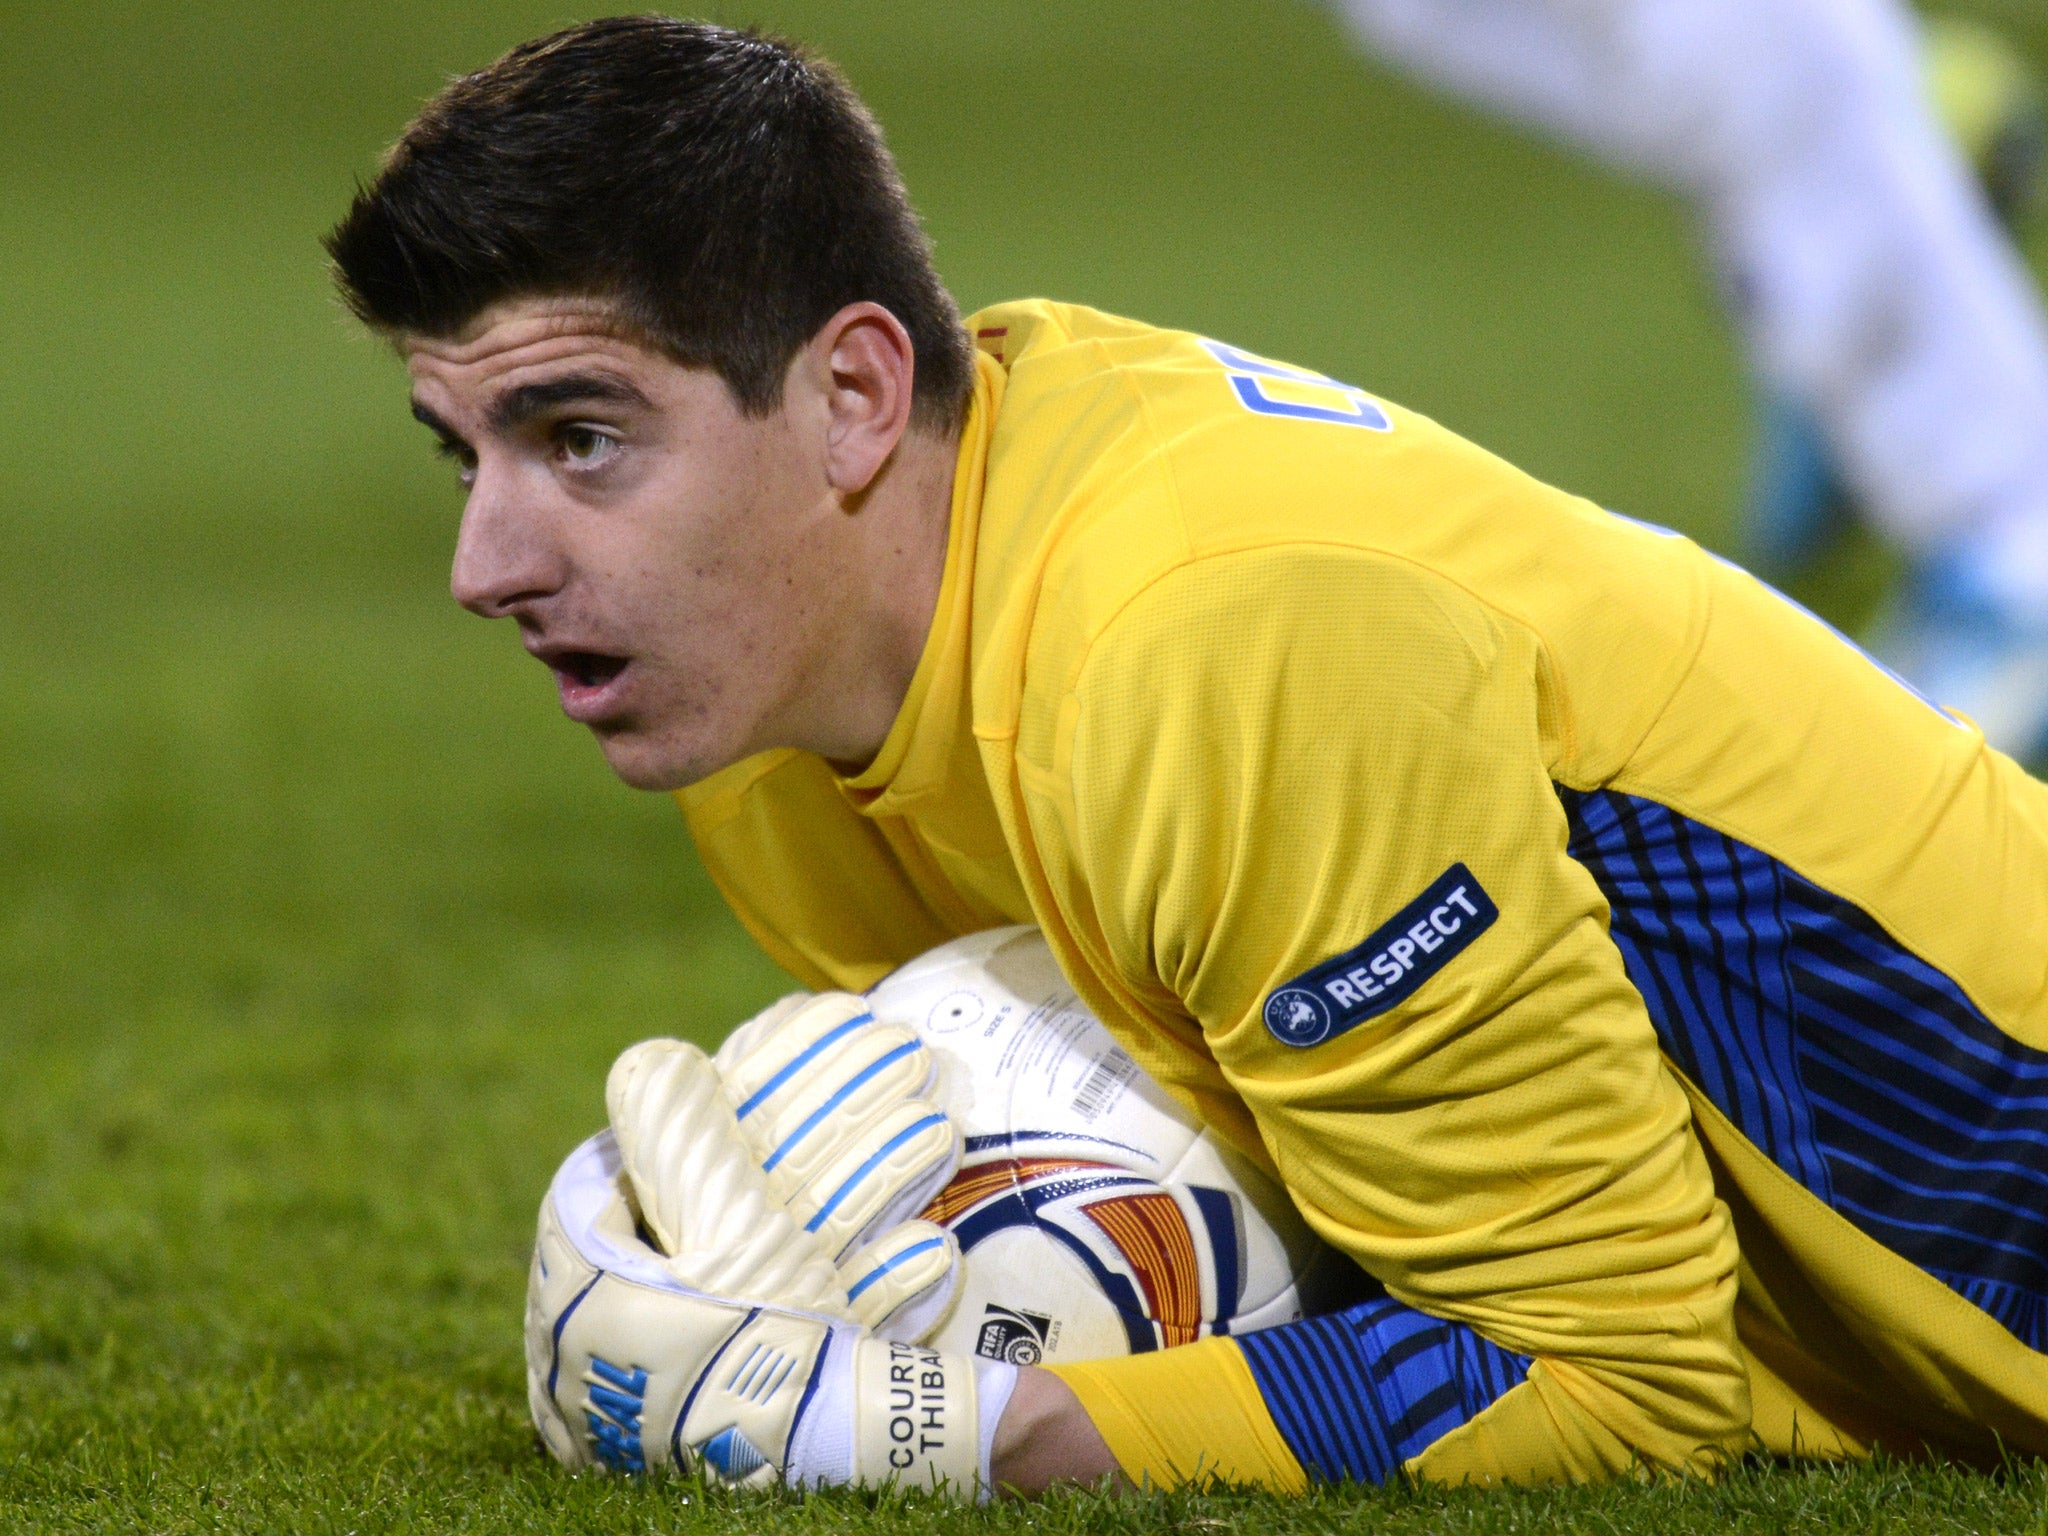 Courtois expects to start the Premier League season in the Chelsea goal